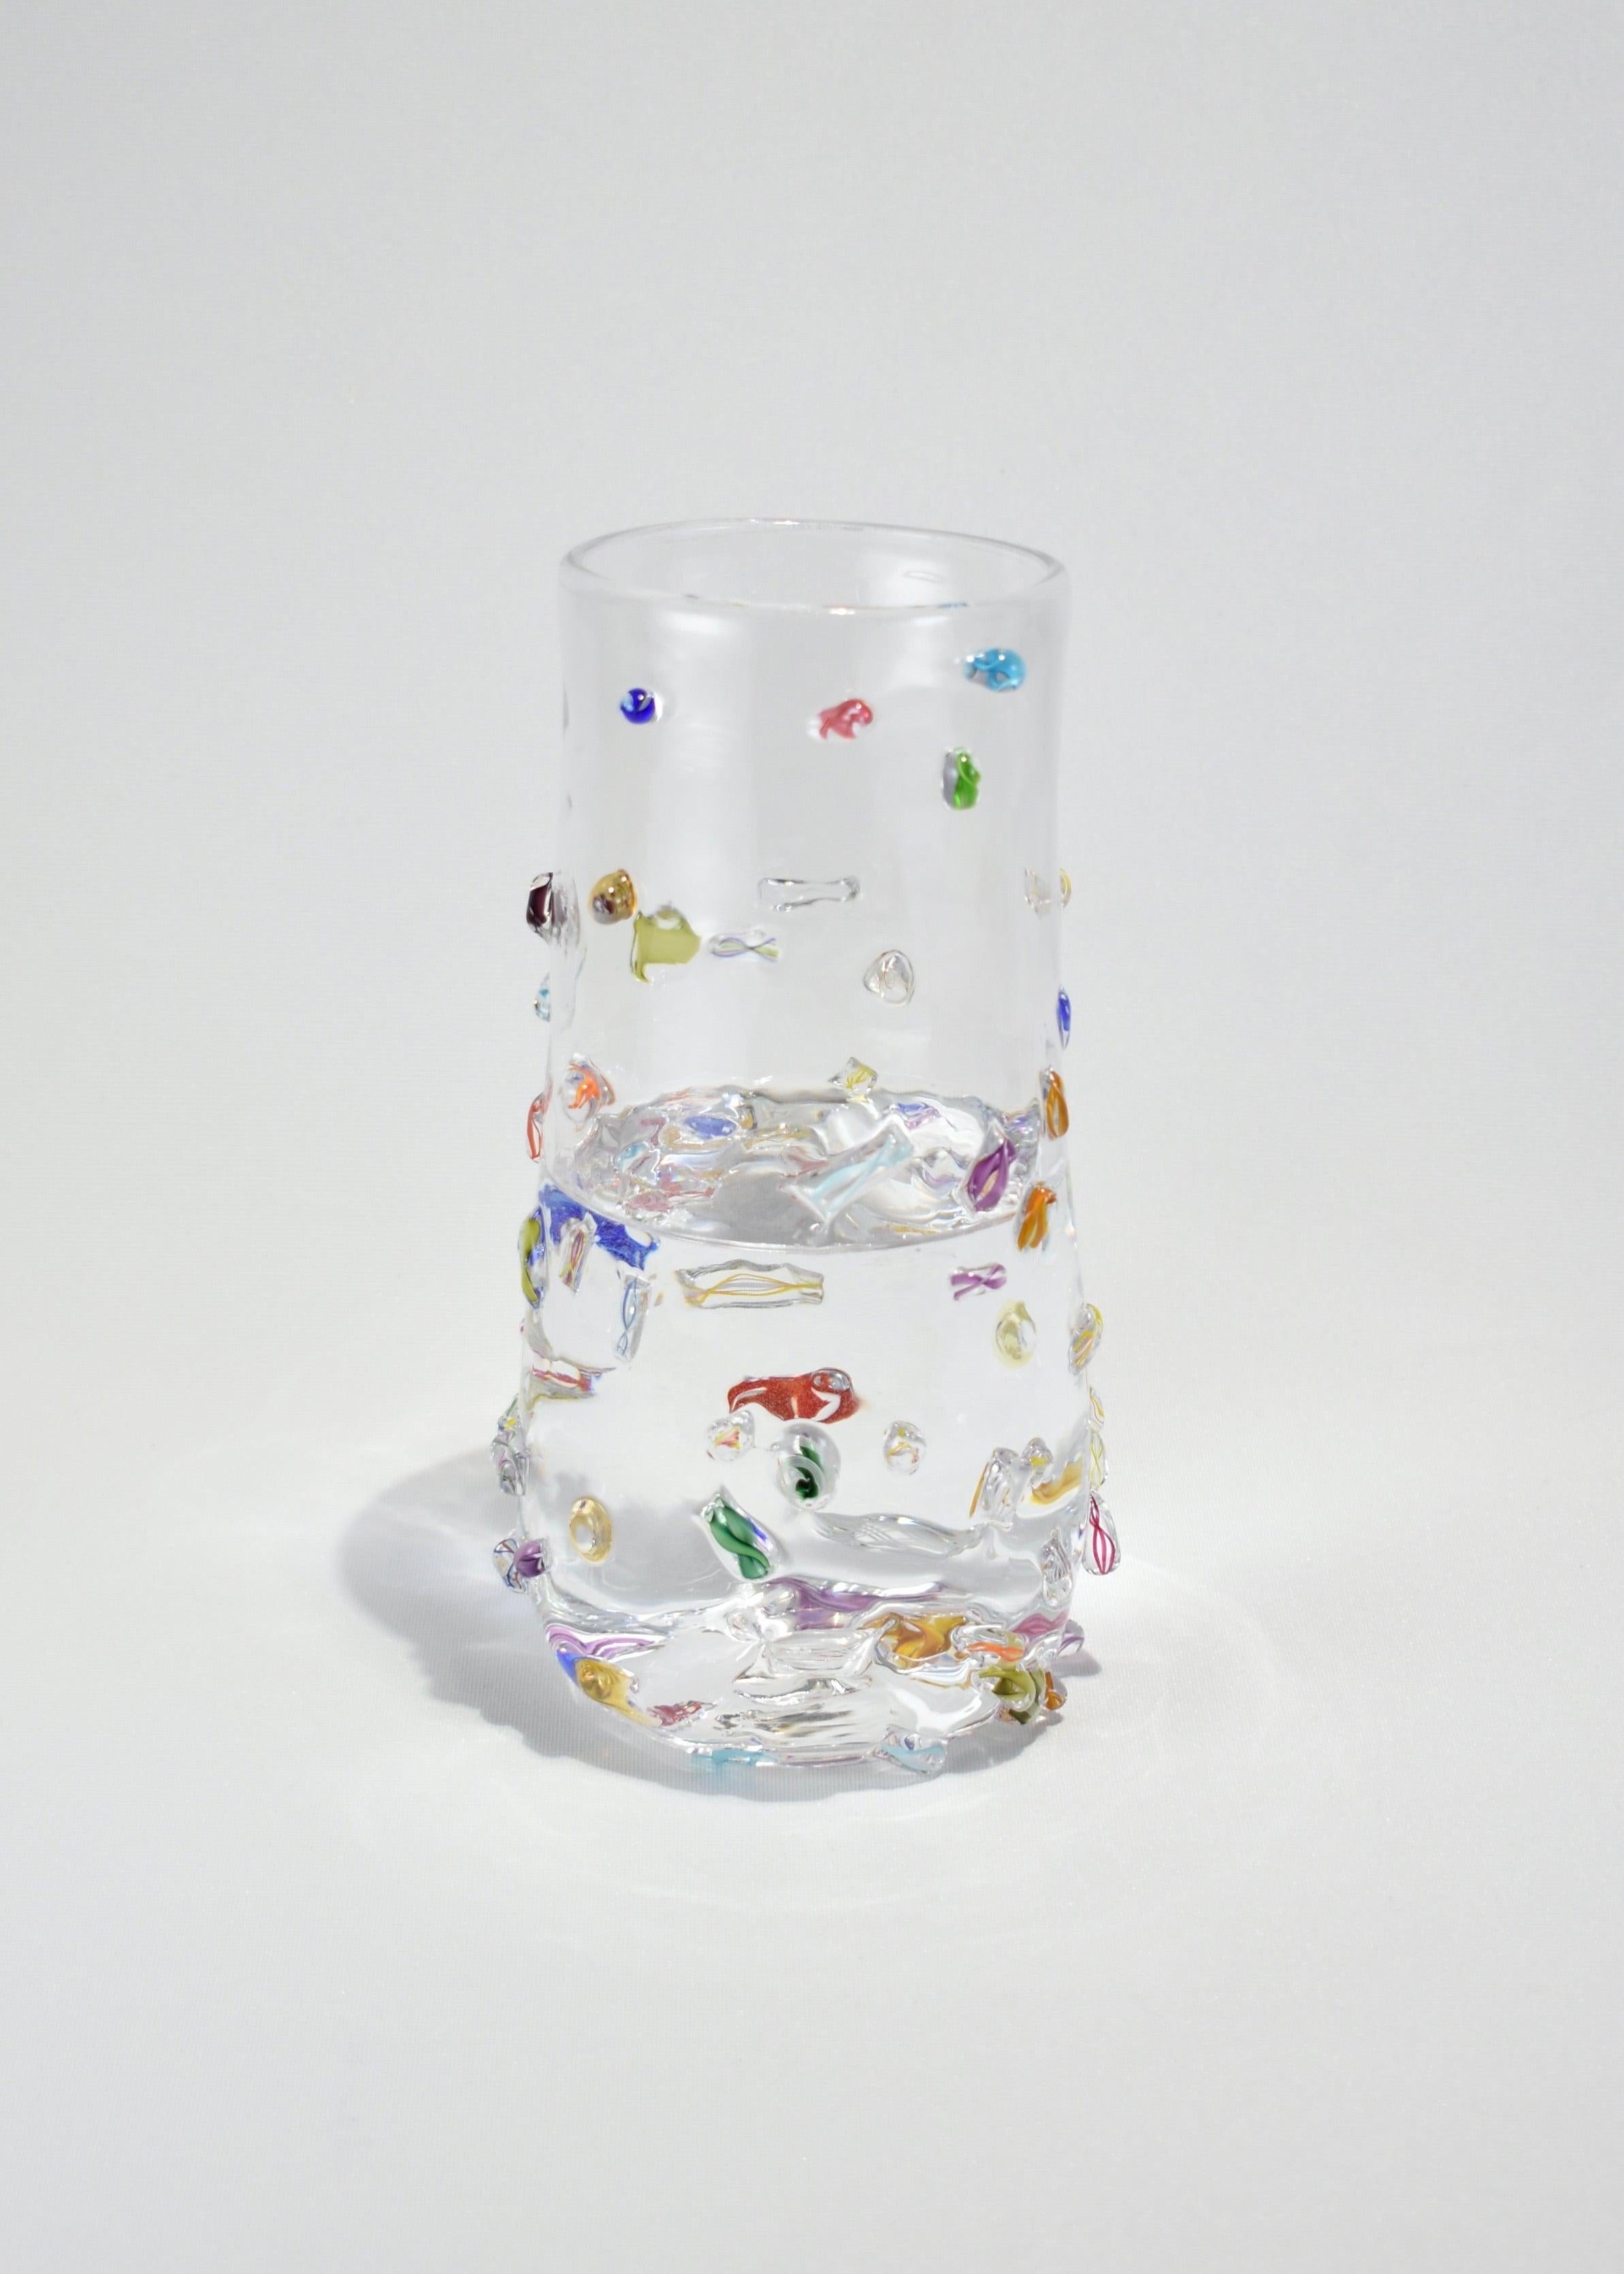 Blown glass cylinder vase with applied decoration. Handmade in USA by Lisa Stover. Exclusive to Casa Shop.

Please note: Due to the handmade nature of this vase, subtle variations in form and finish are to be expected.

Dimensions: height varies